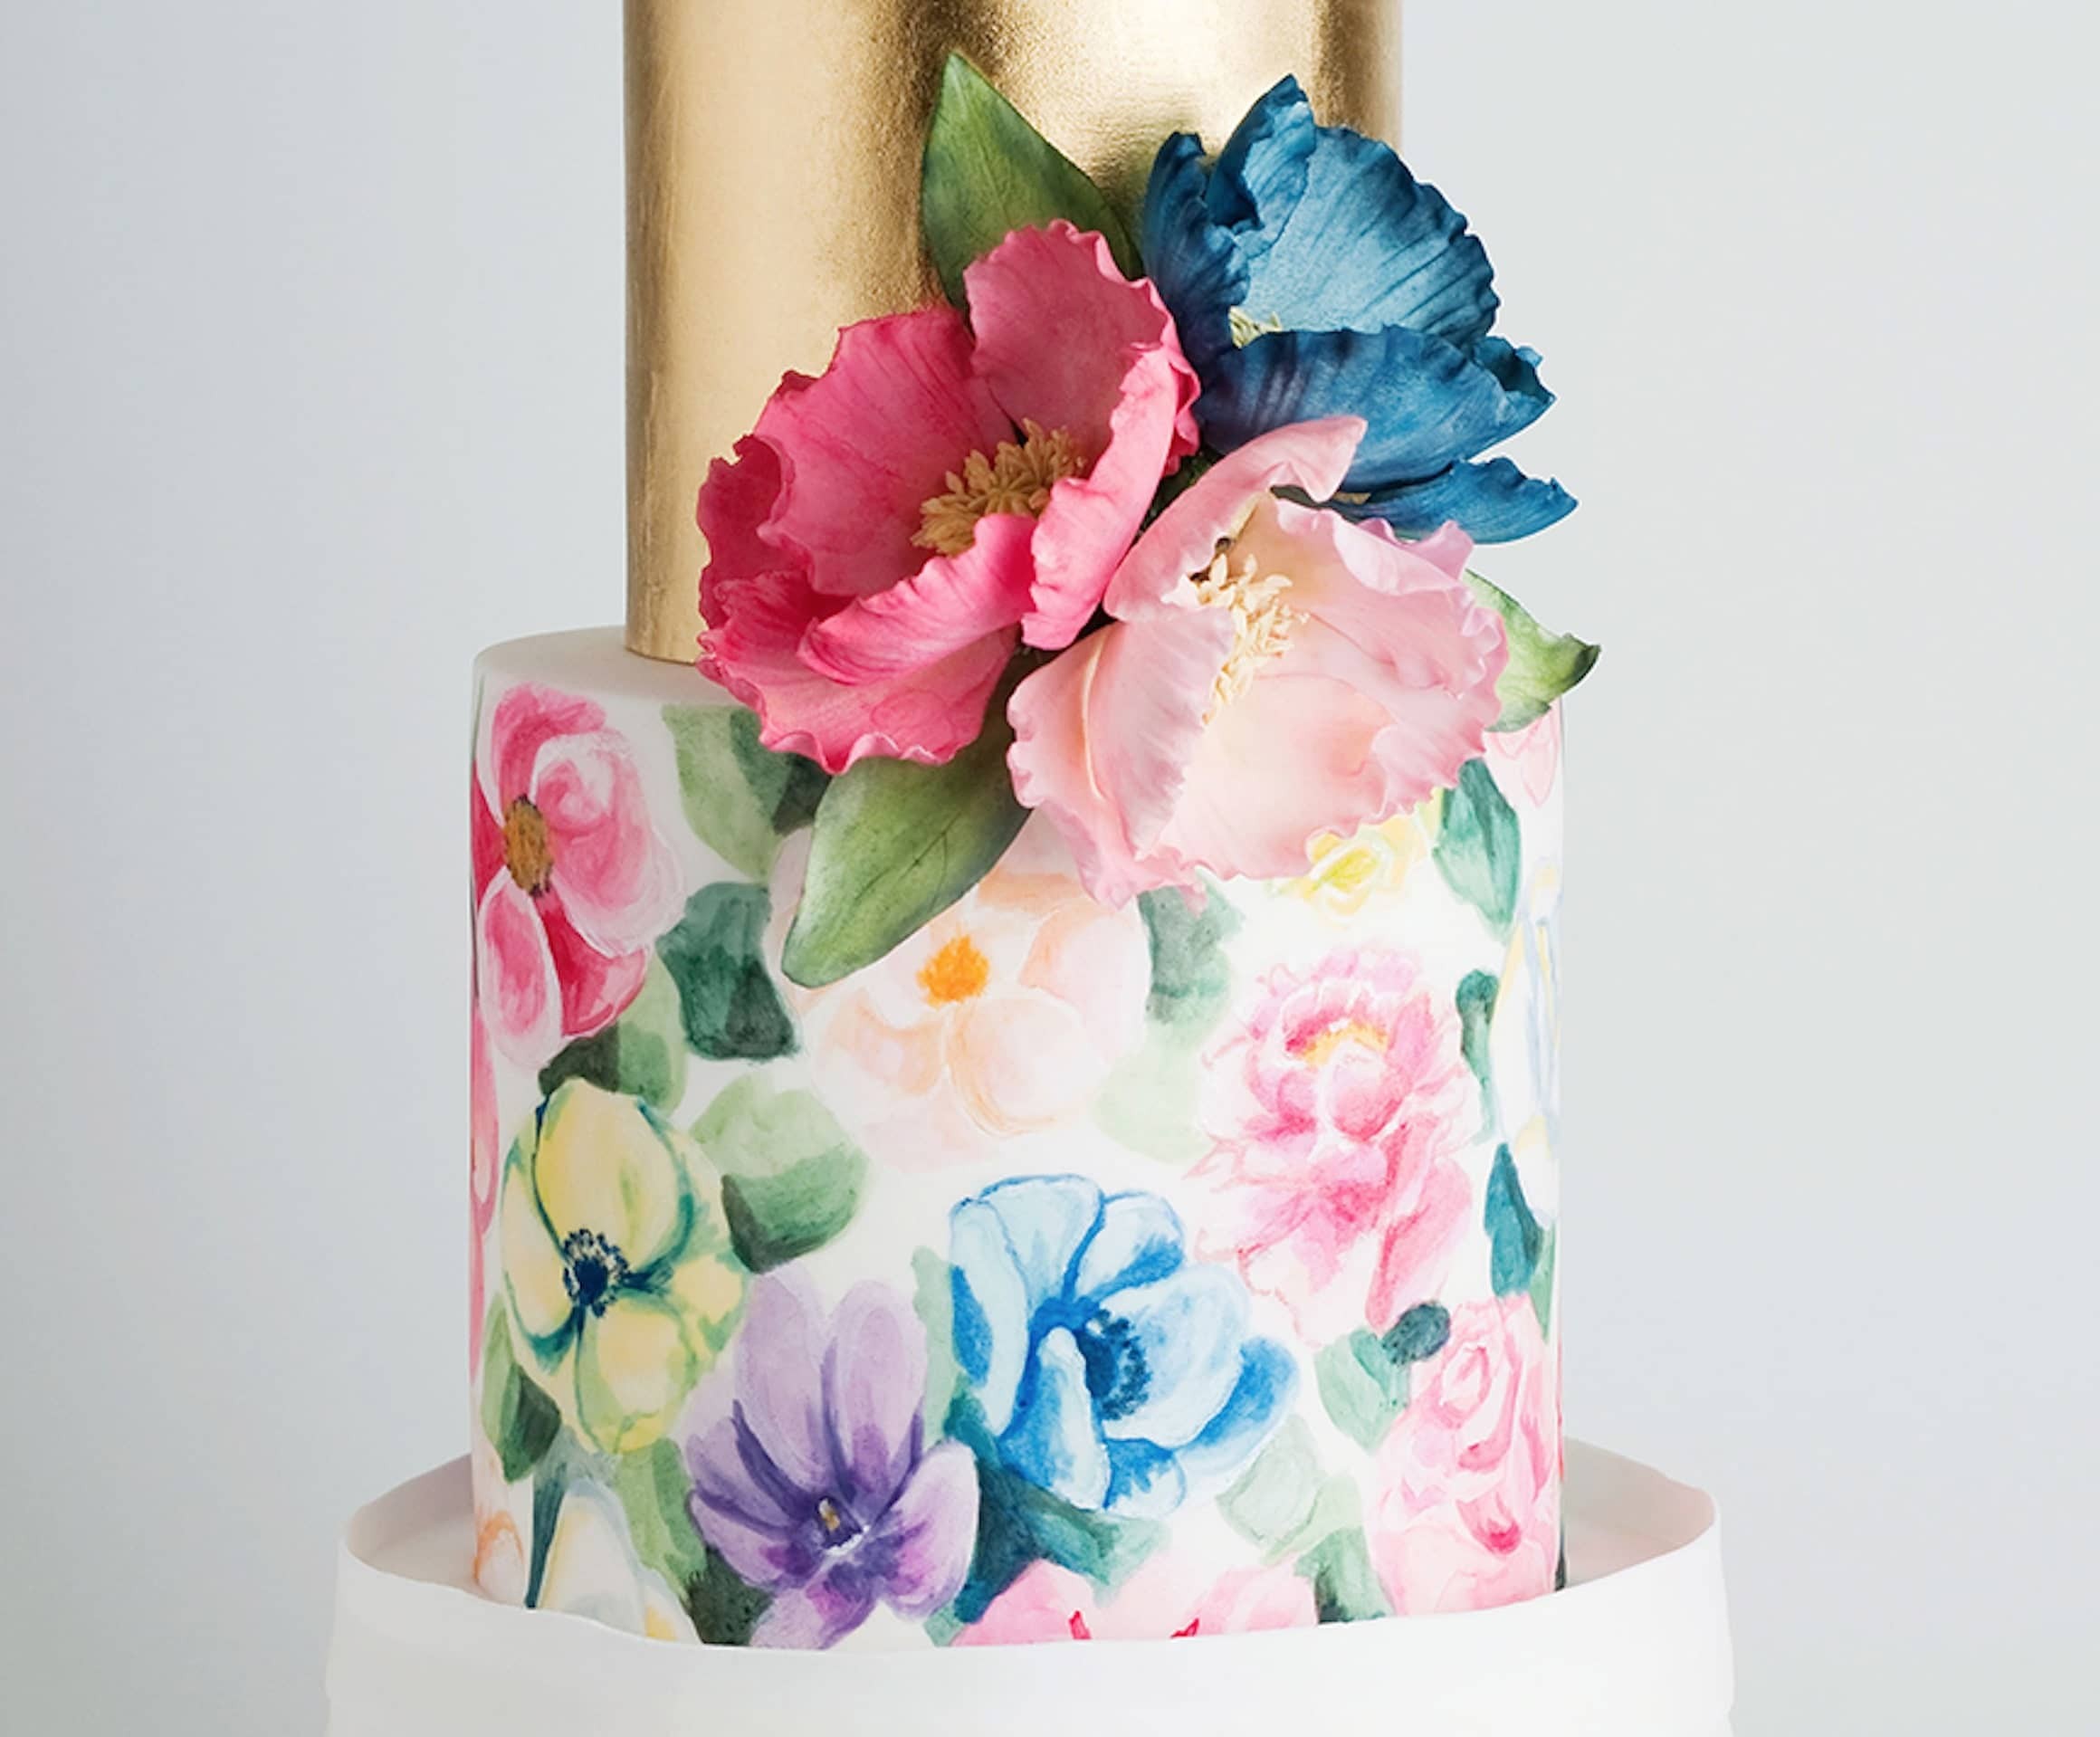 Cake Trends to Inspire Your Next Celebration Cake | Cakes by Robin